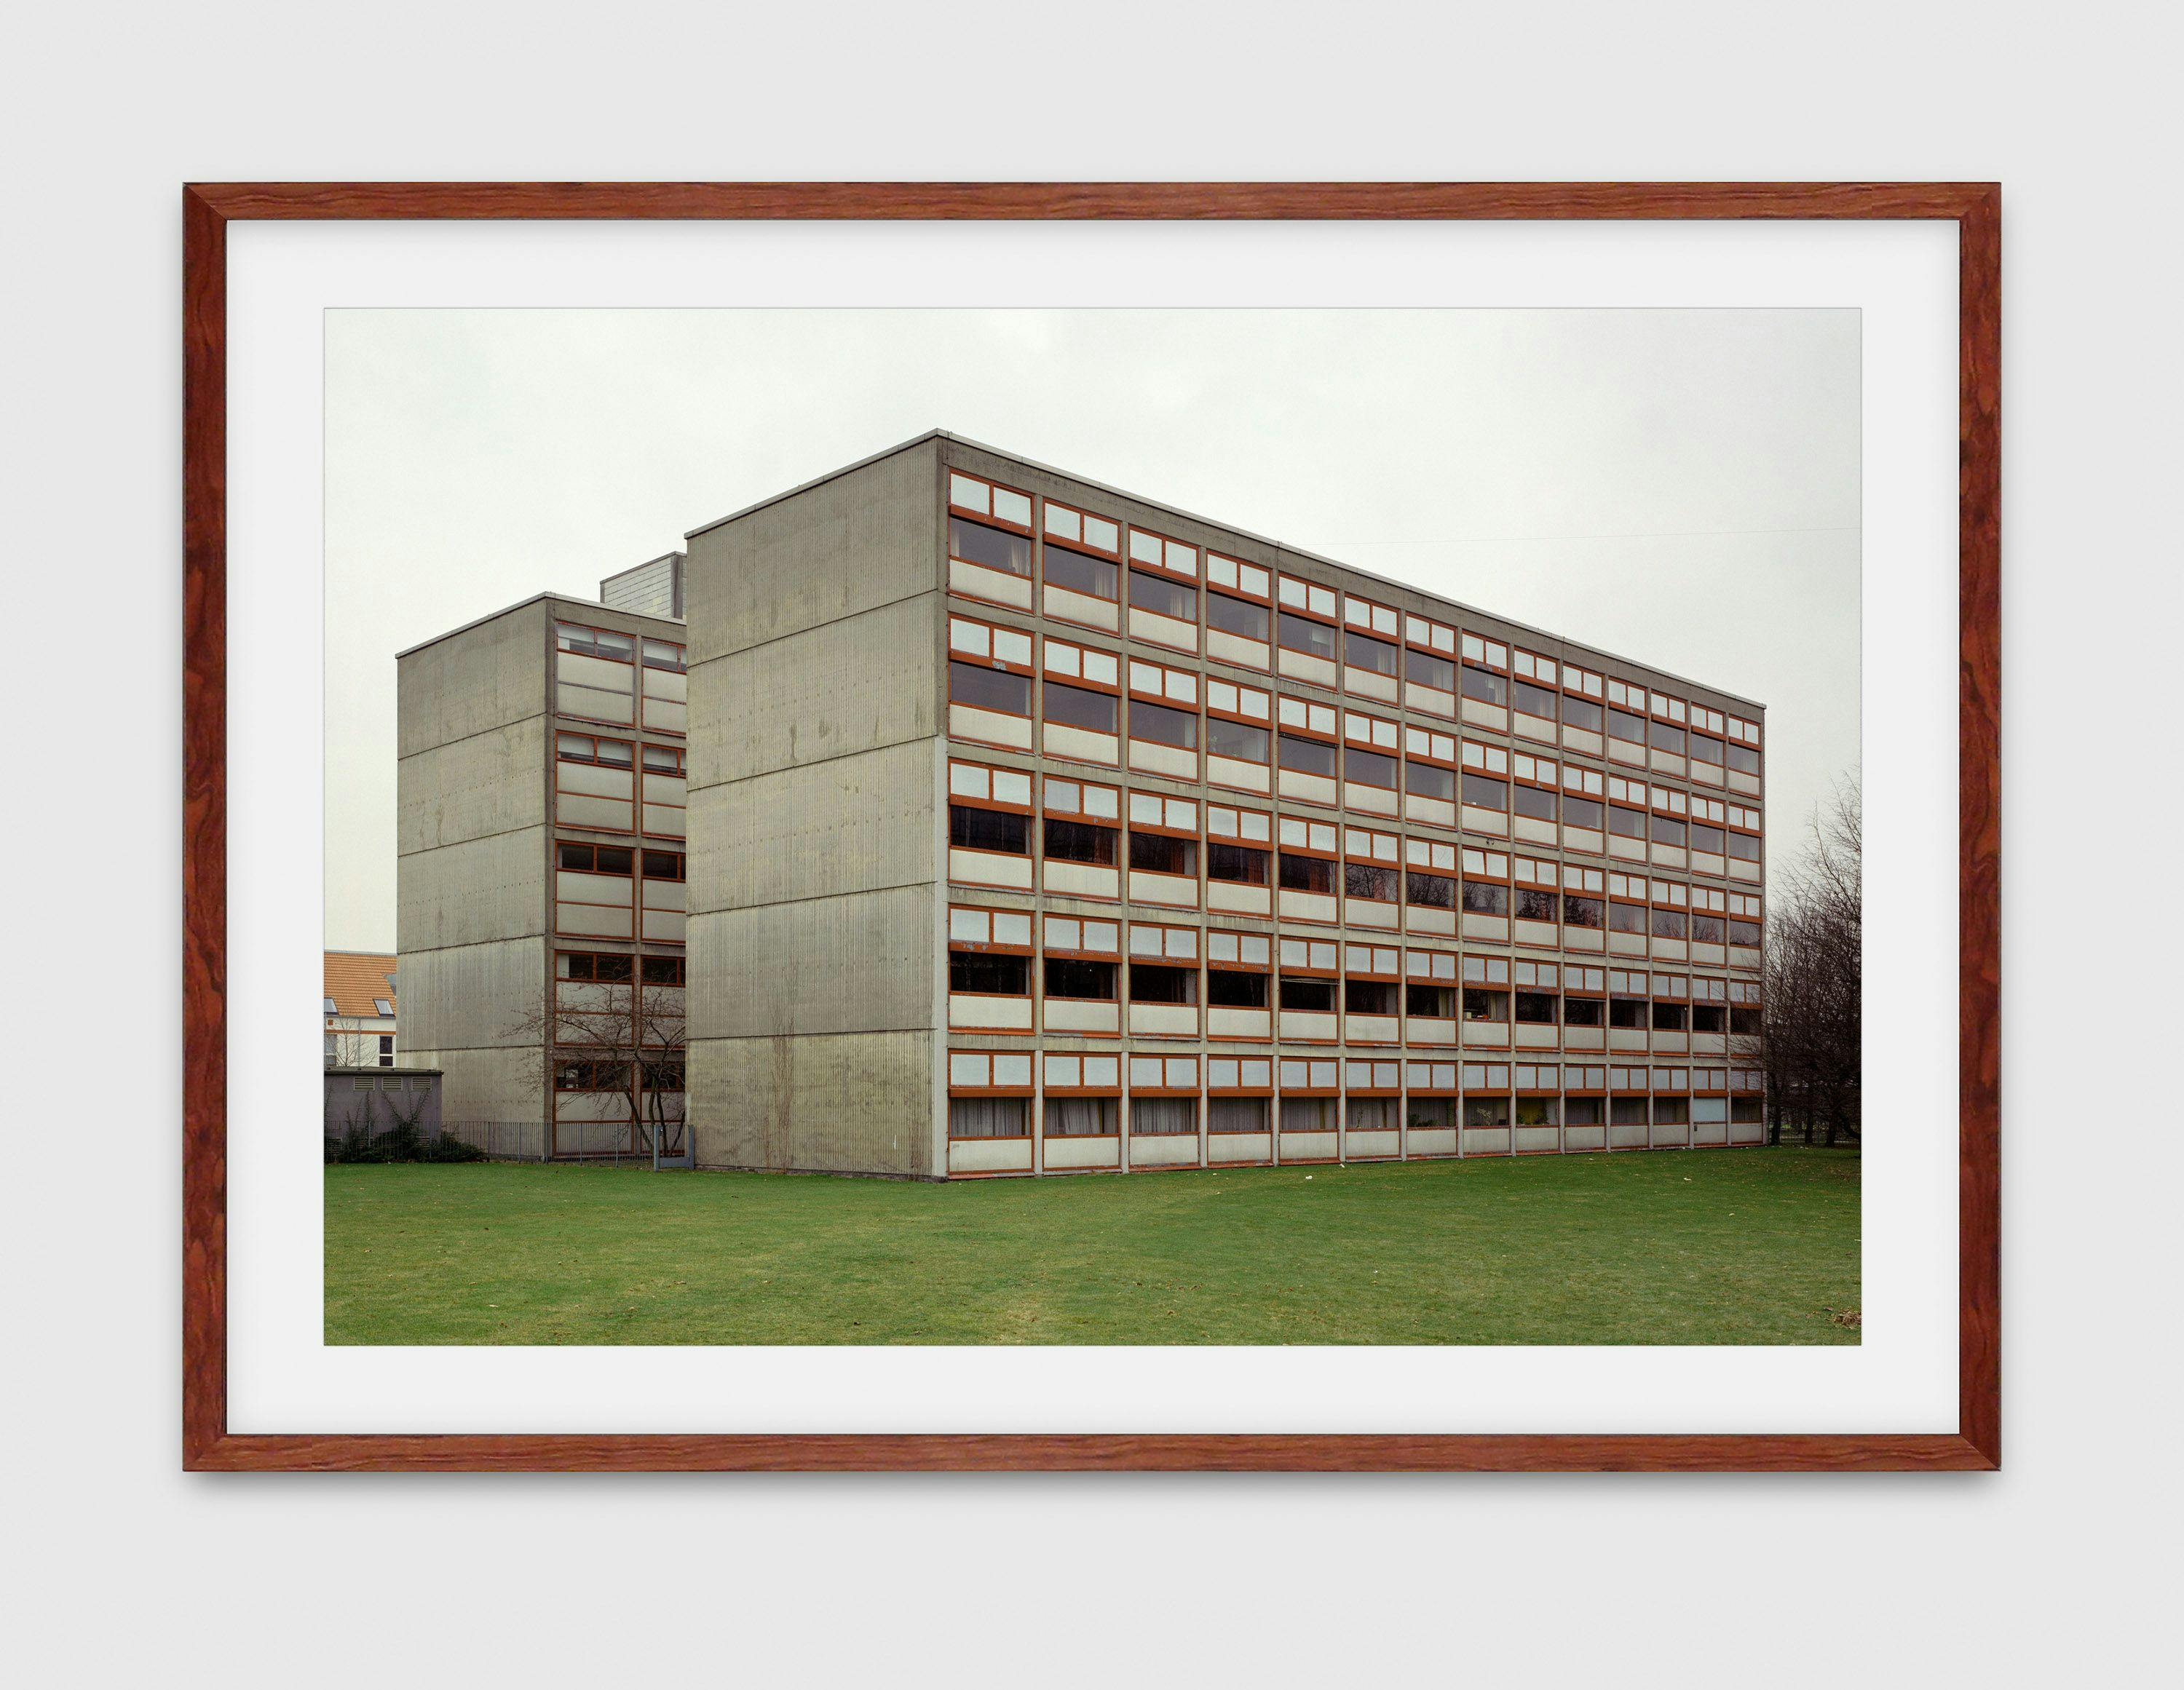 A photograph by Thomas Ruff, titled Haus Nr. 9 II, dated 1991.